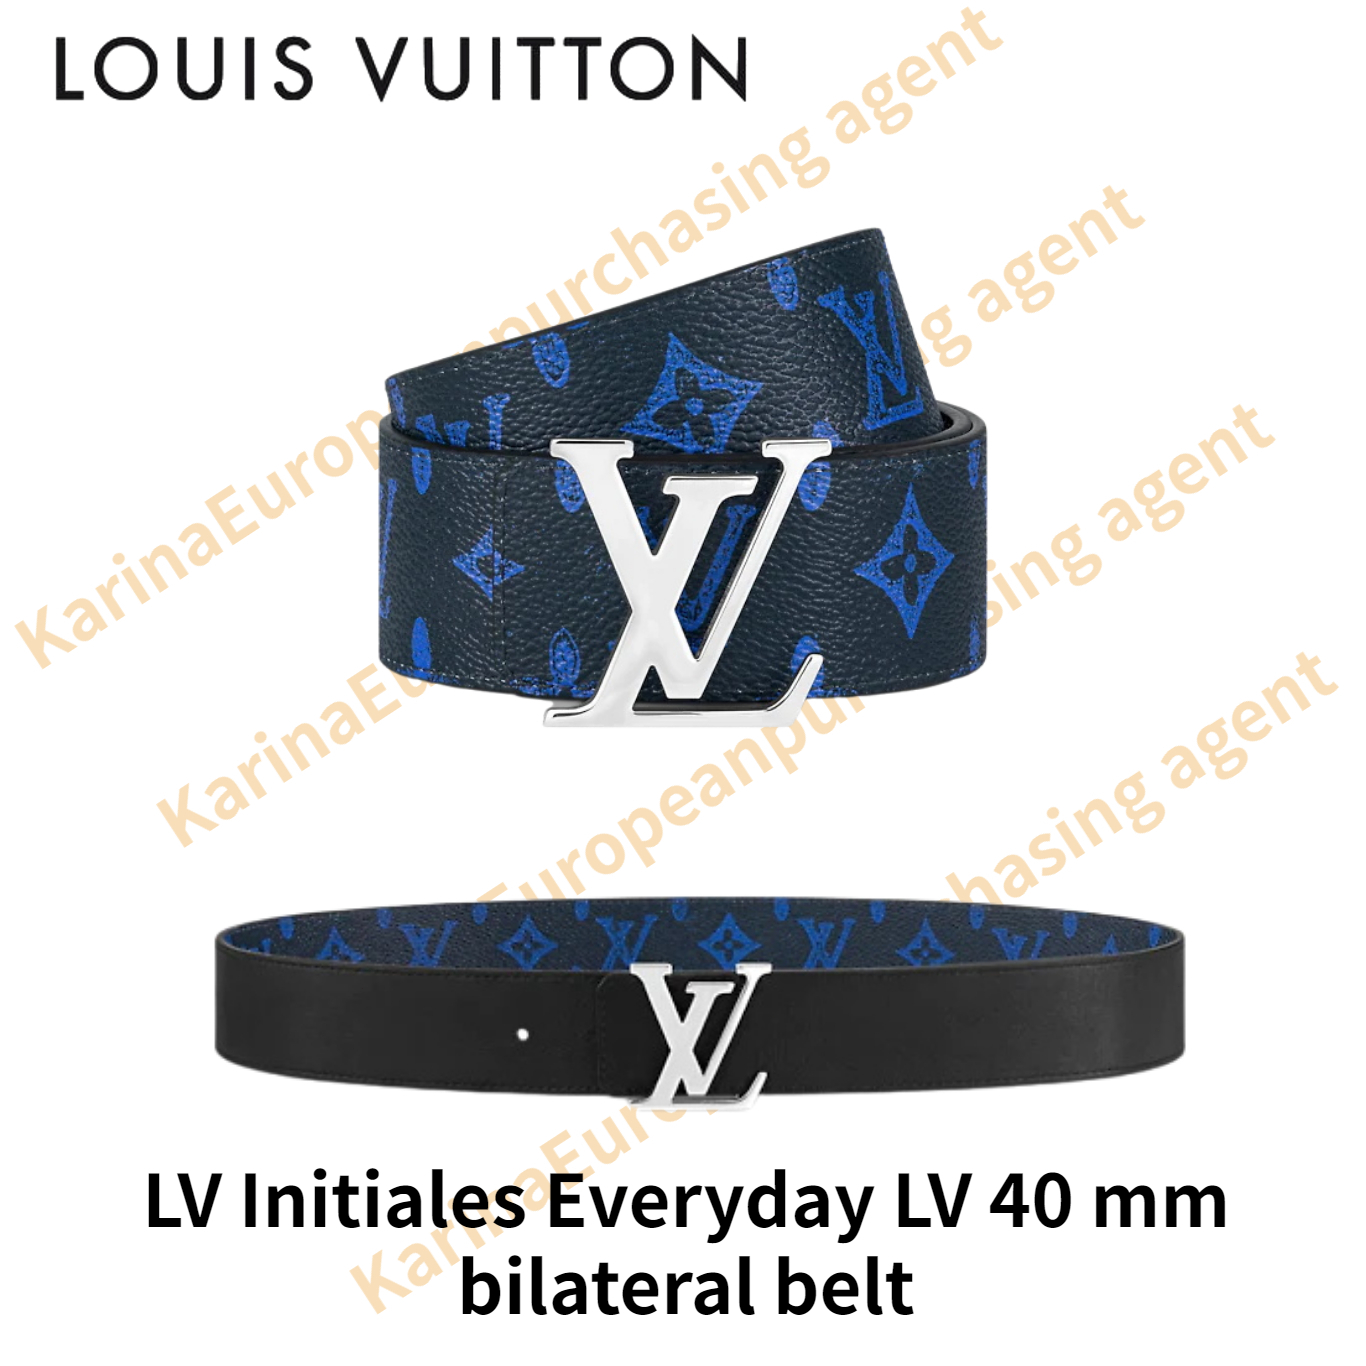 Classic models LV Initiales Everyday LV 40 mm bilateral belt Louis Vuitton